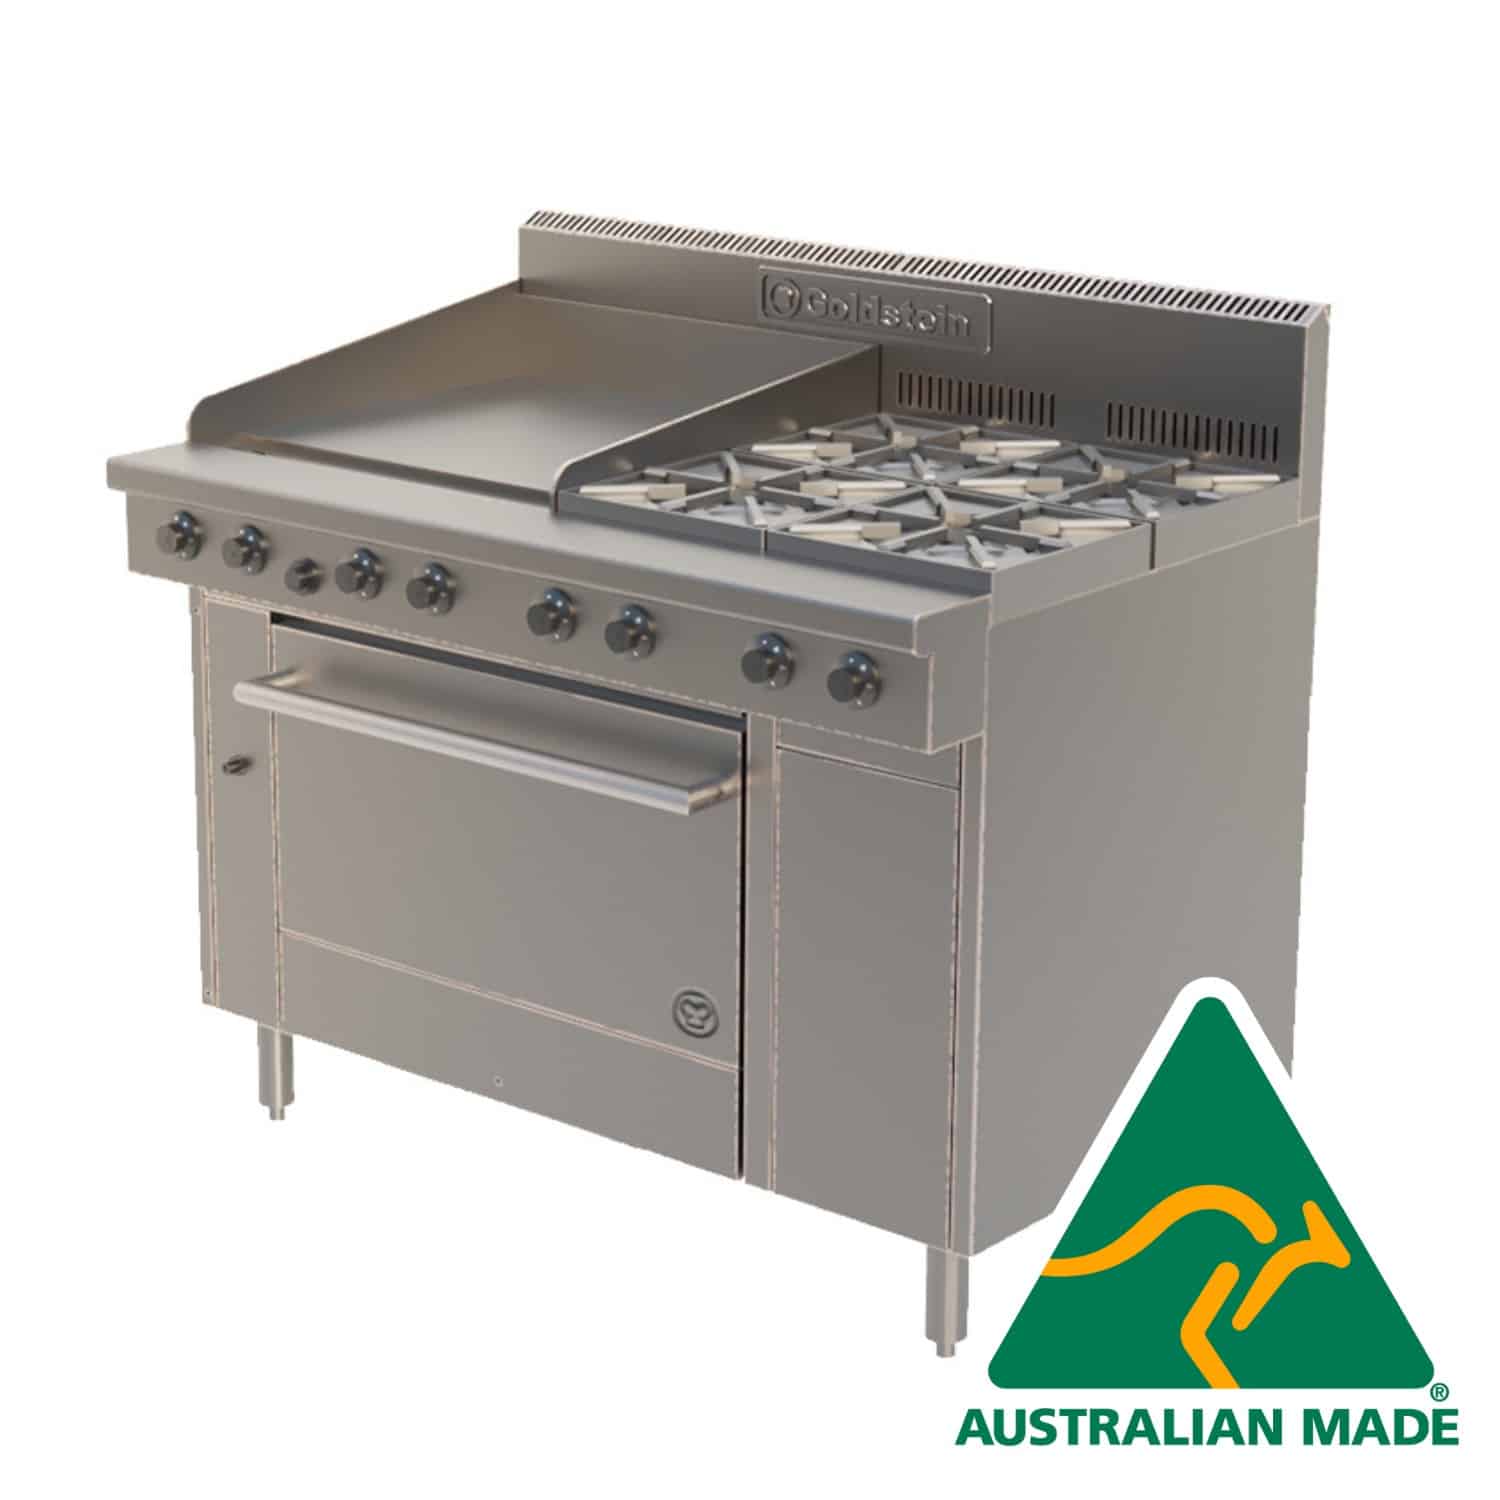 Goldstein 4 burners with griddle plate oven range